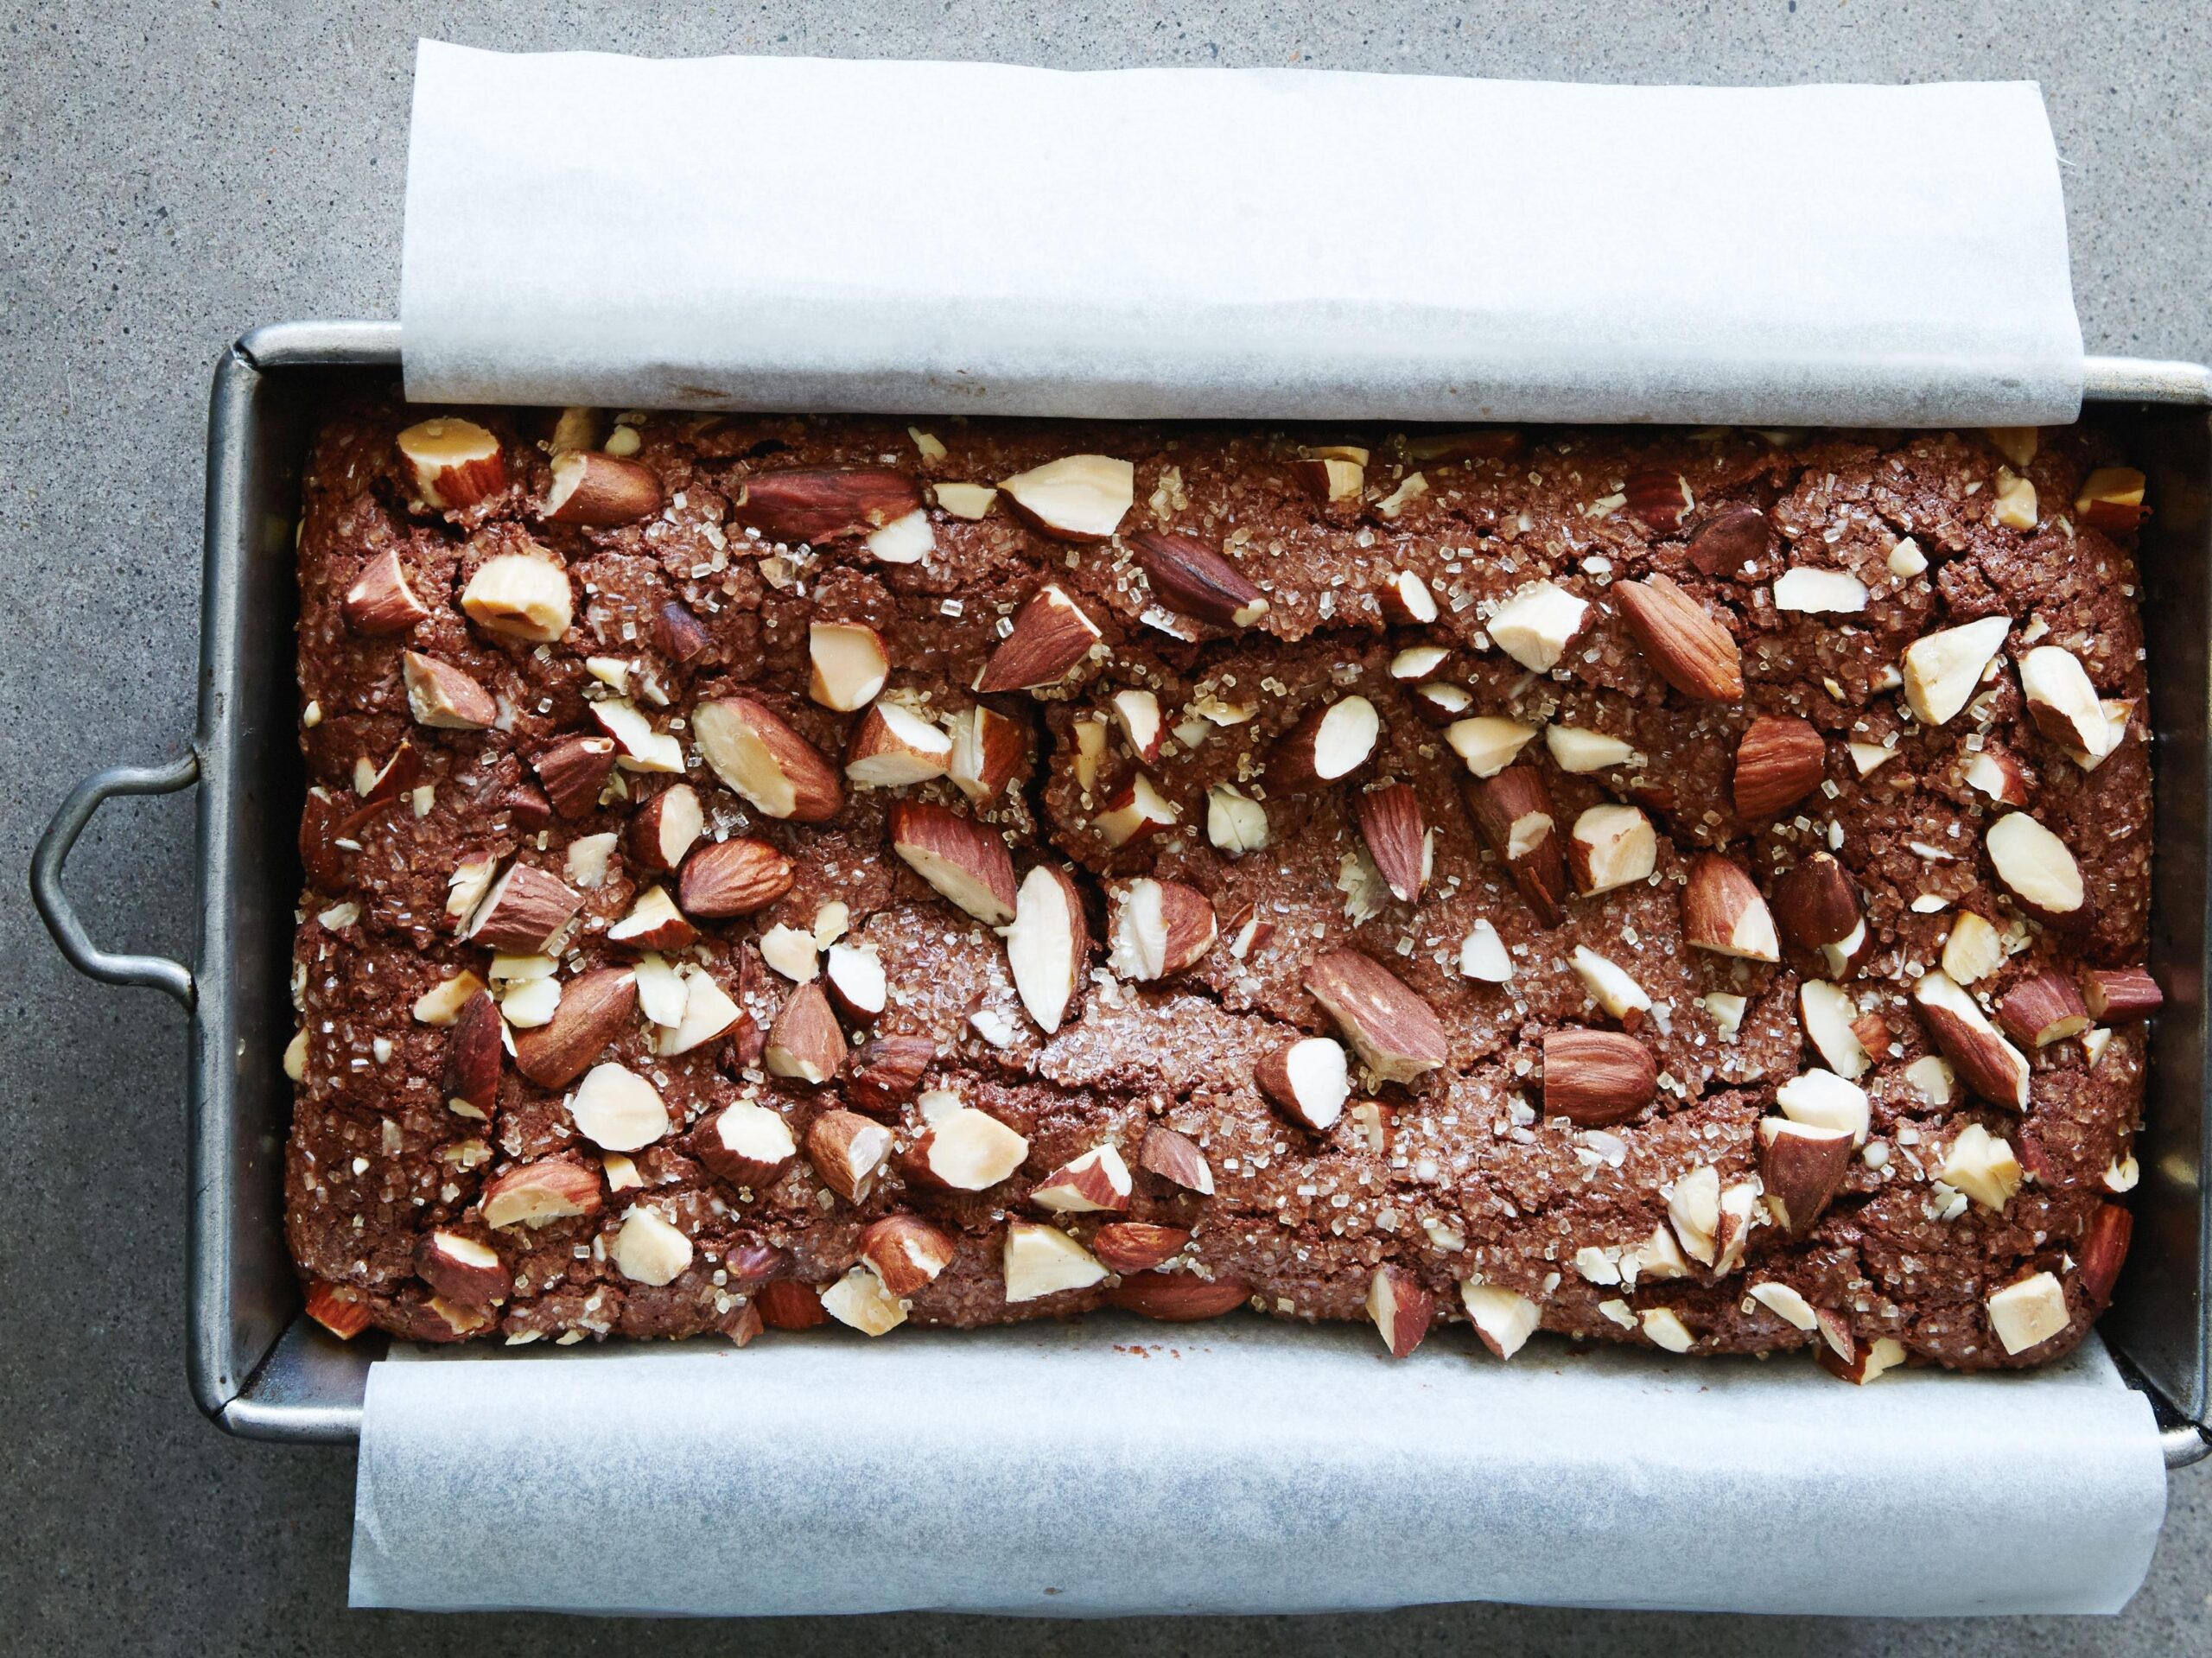  The chocolate sprinkles are an irresistible addition to this tea bread.